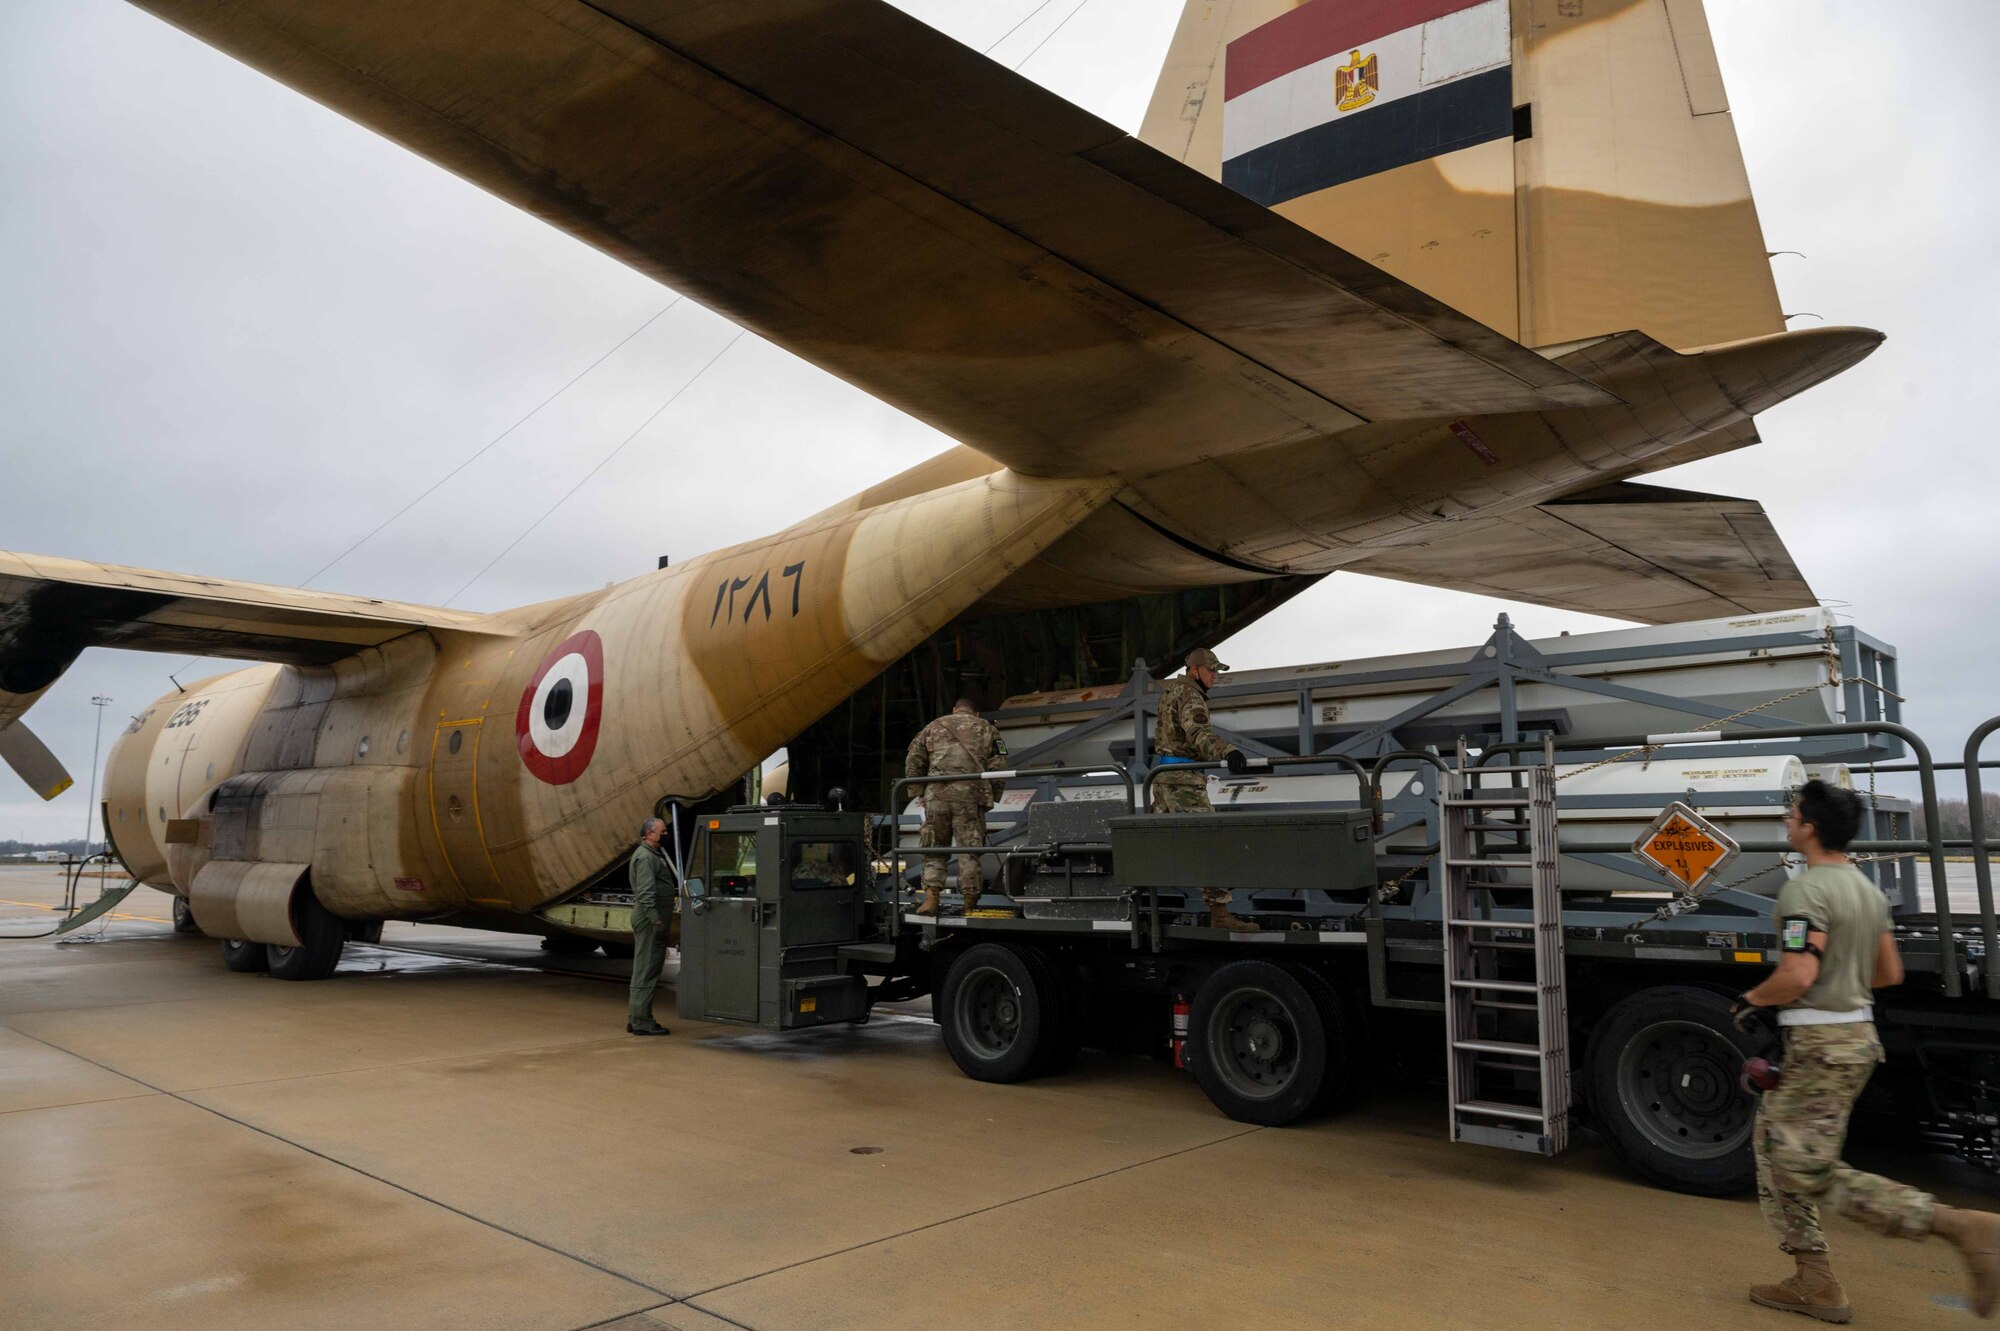 Airmen from the 436th Aerial Port Squadron load cargo onto an Egyptian Air Force C-130 Hercules during a foreign military sales mission at Dover Air Force, Delaware, Dec. 11, 2021. The United States and Egypt share a strong partnership based on mutual interest in Middle East peace and stability, economic opportunity and regional security. Due to its strategic location, Dover AFB supports approximately $3.5 billion worth of foreign military sales annually. (U.S. Air Force photo by Senior Airman Faith Schaefer)